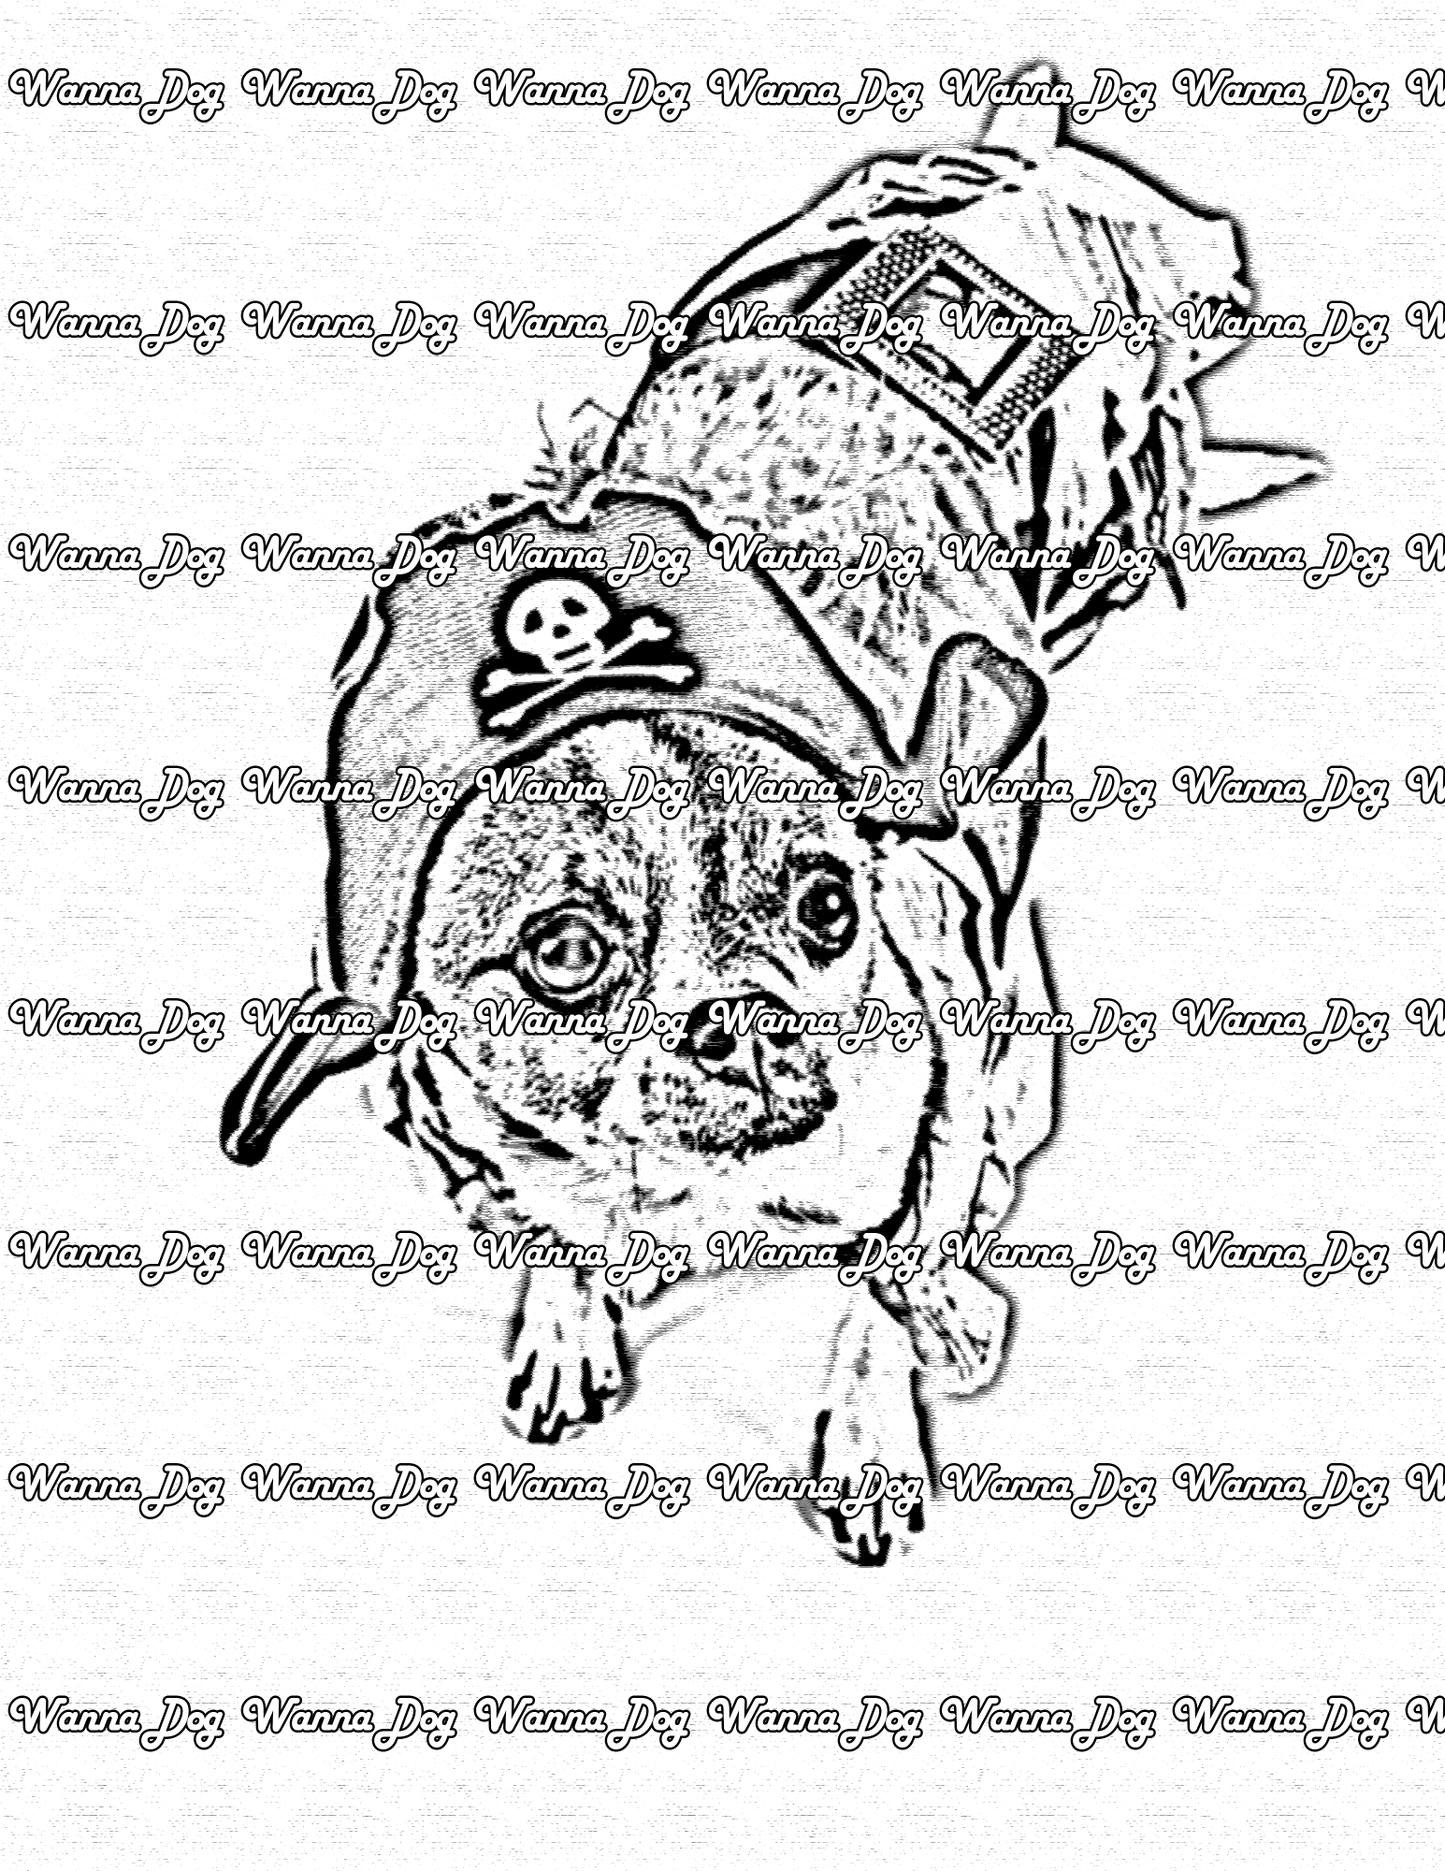 Halloween Dog Coloring Page of a Dog in a pirate costume